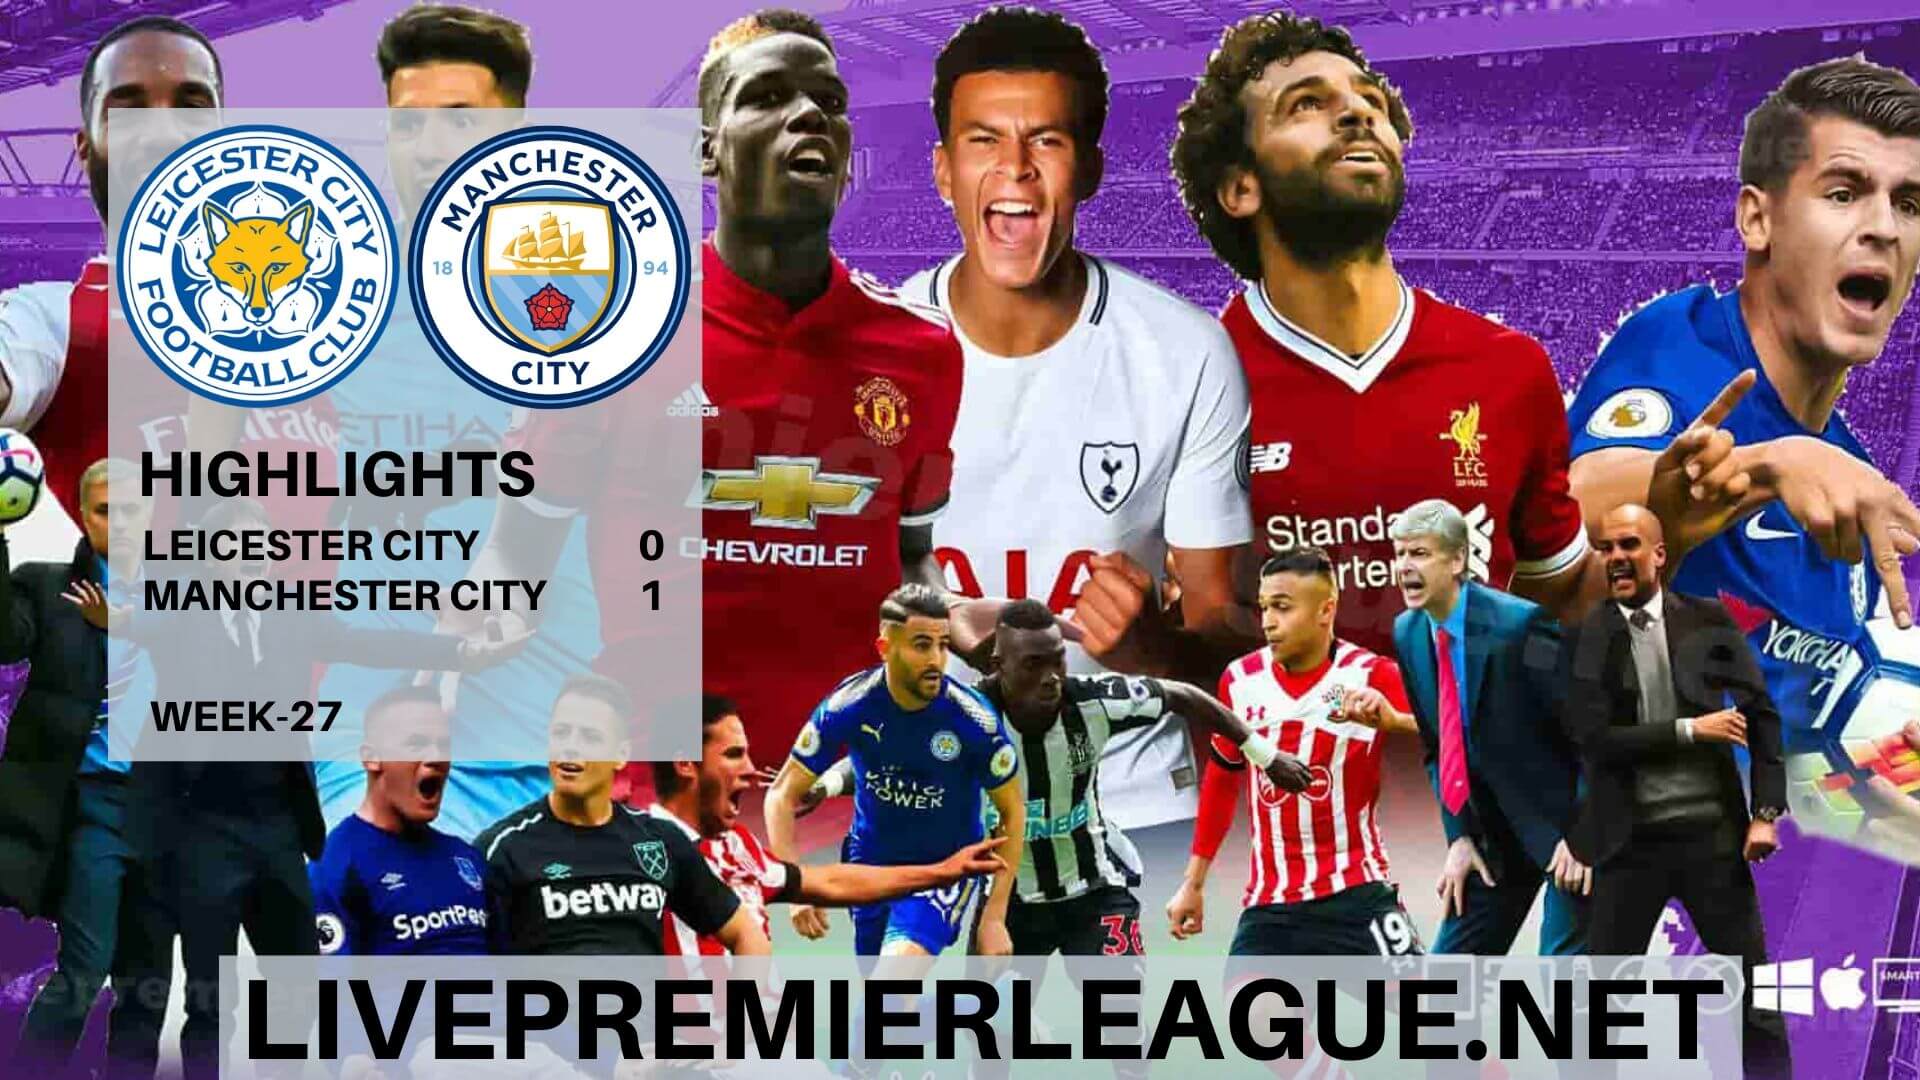 Leicester City Vs Manchester City Highlights 2020 Week 27